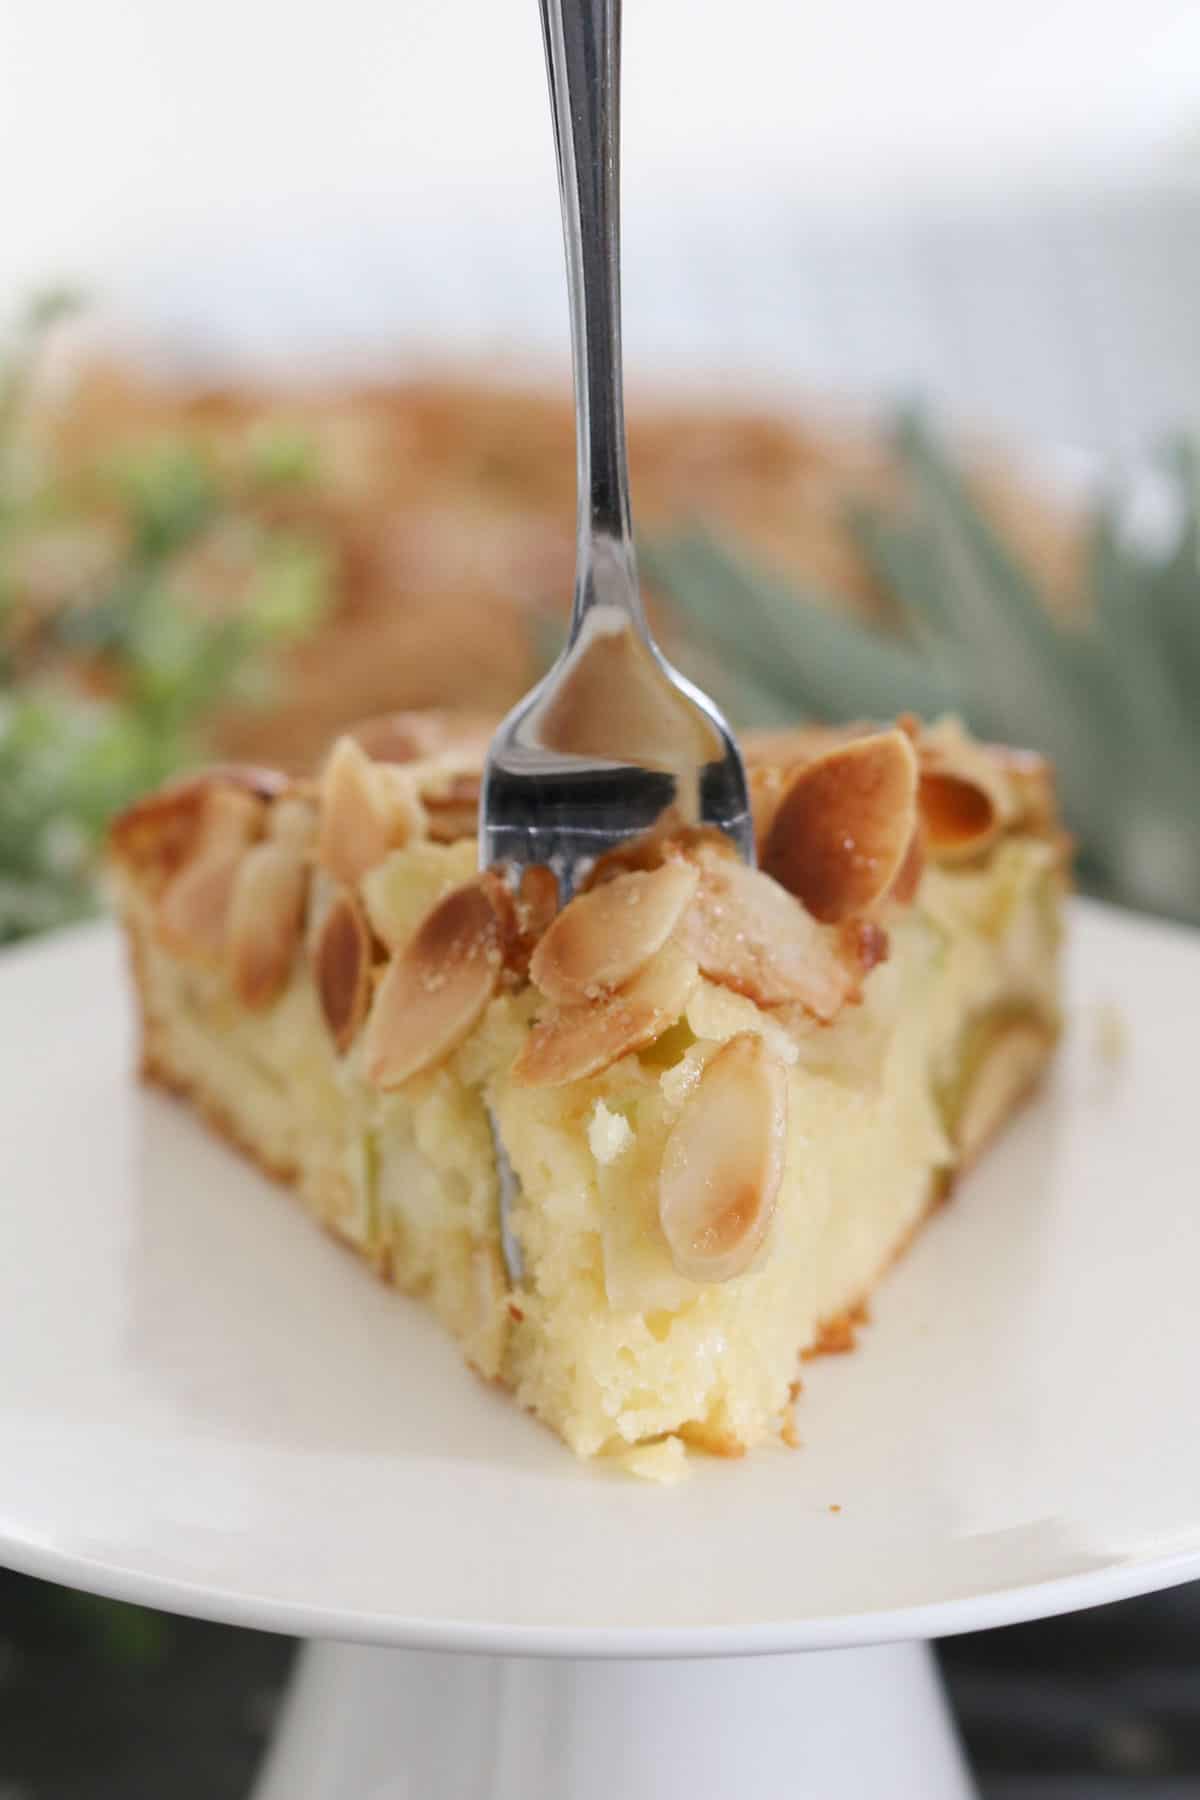 A fork in a slice of elegant almond cake served on a cake stand.